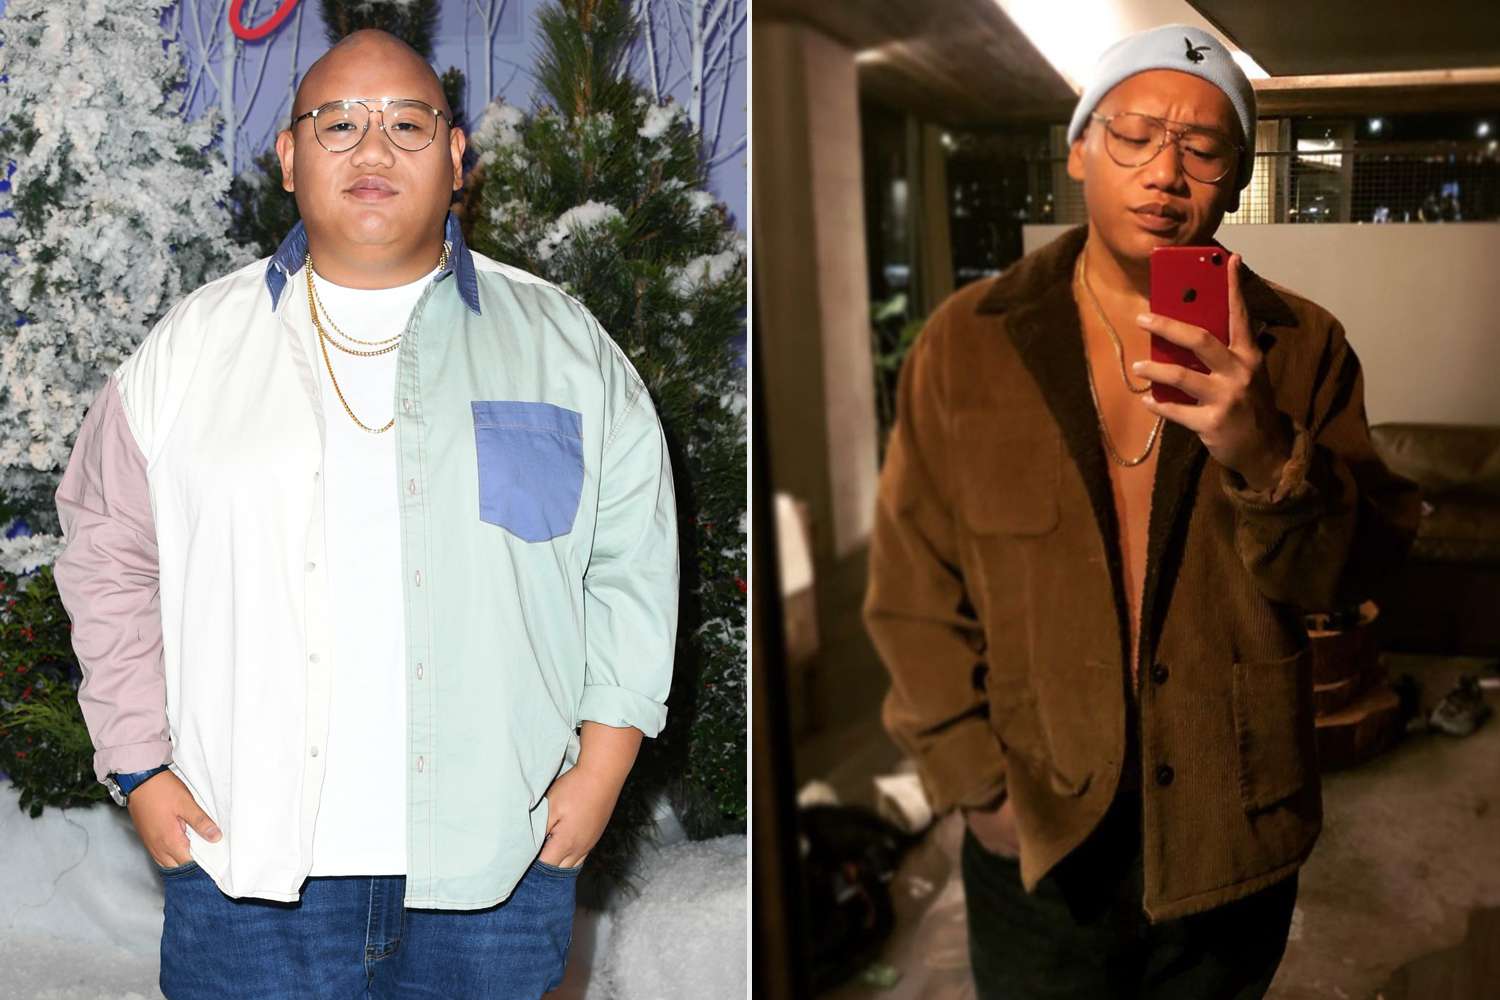 Spider-Man's Jacob Batalon Shows Off Weight Loss | PEOPLE.com